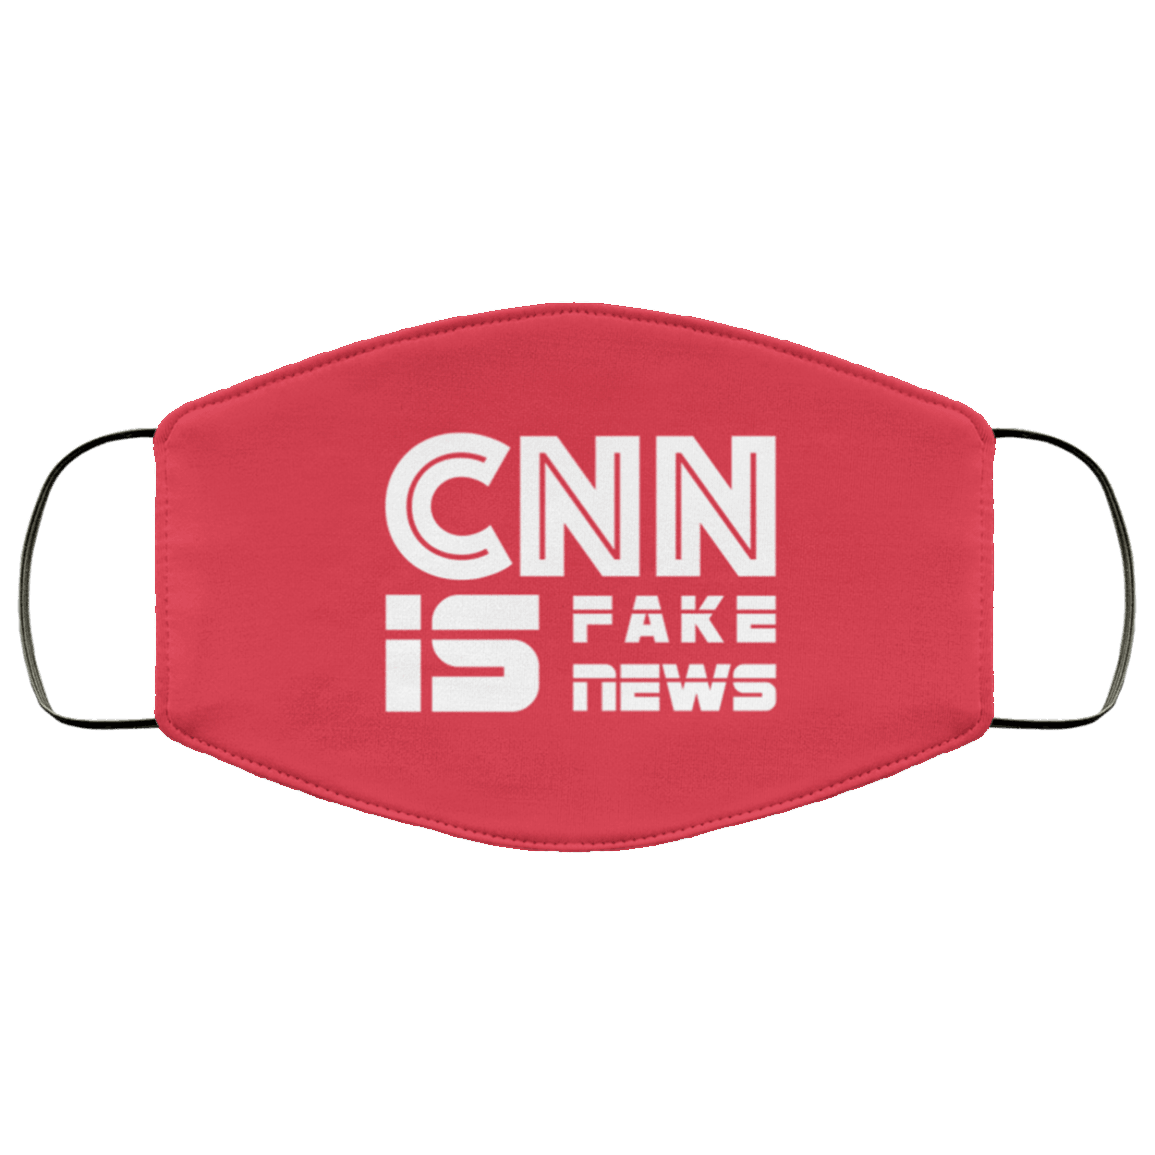 Designs by MyUtopia Shout Out:CNN is Fake News Trump Humor Adult Fabric Face Mask with Elastic Ear Loops,3 Layer Fabric Face Mask / Red / Adult,Fabric Face Mask